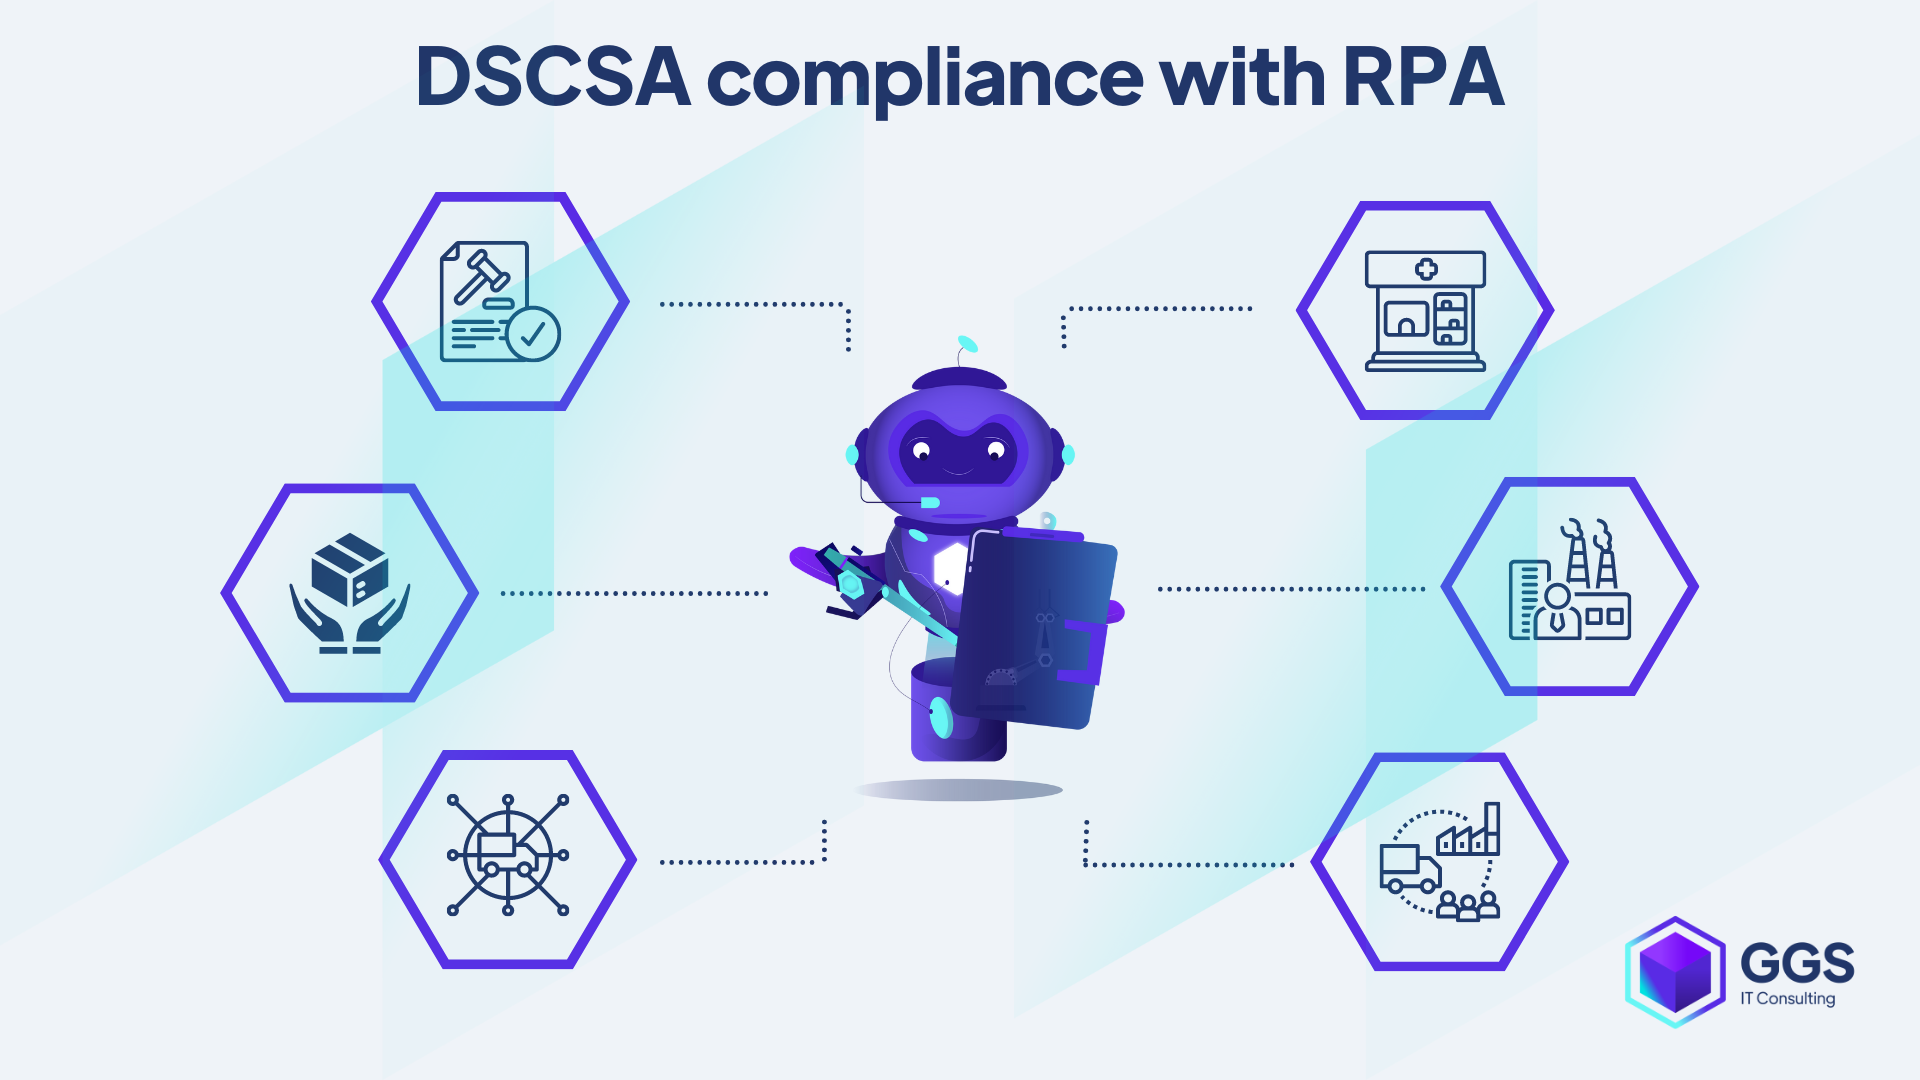 DSCSA compliance with RPA examples